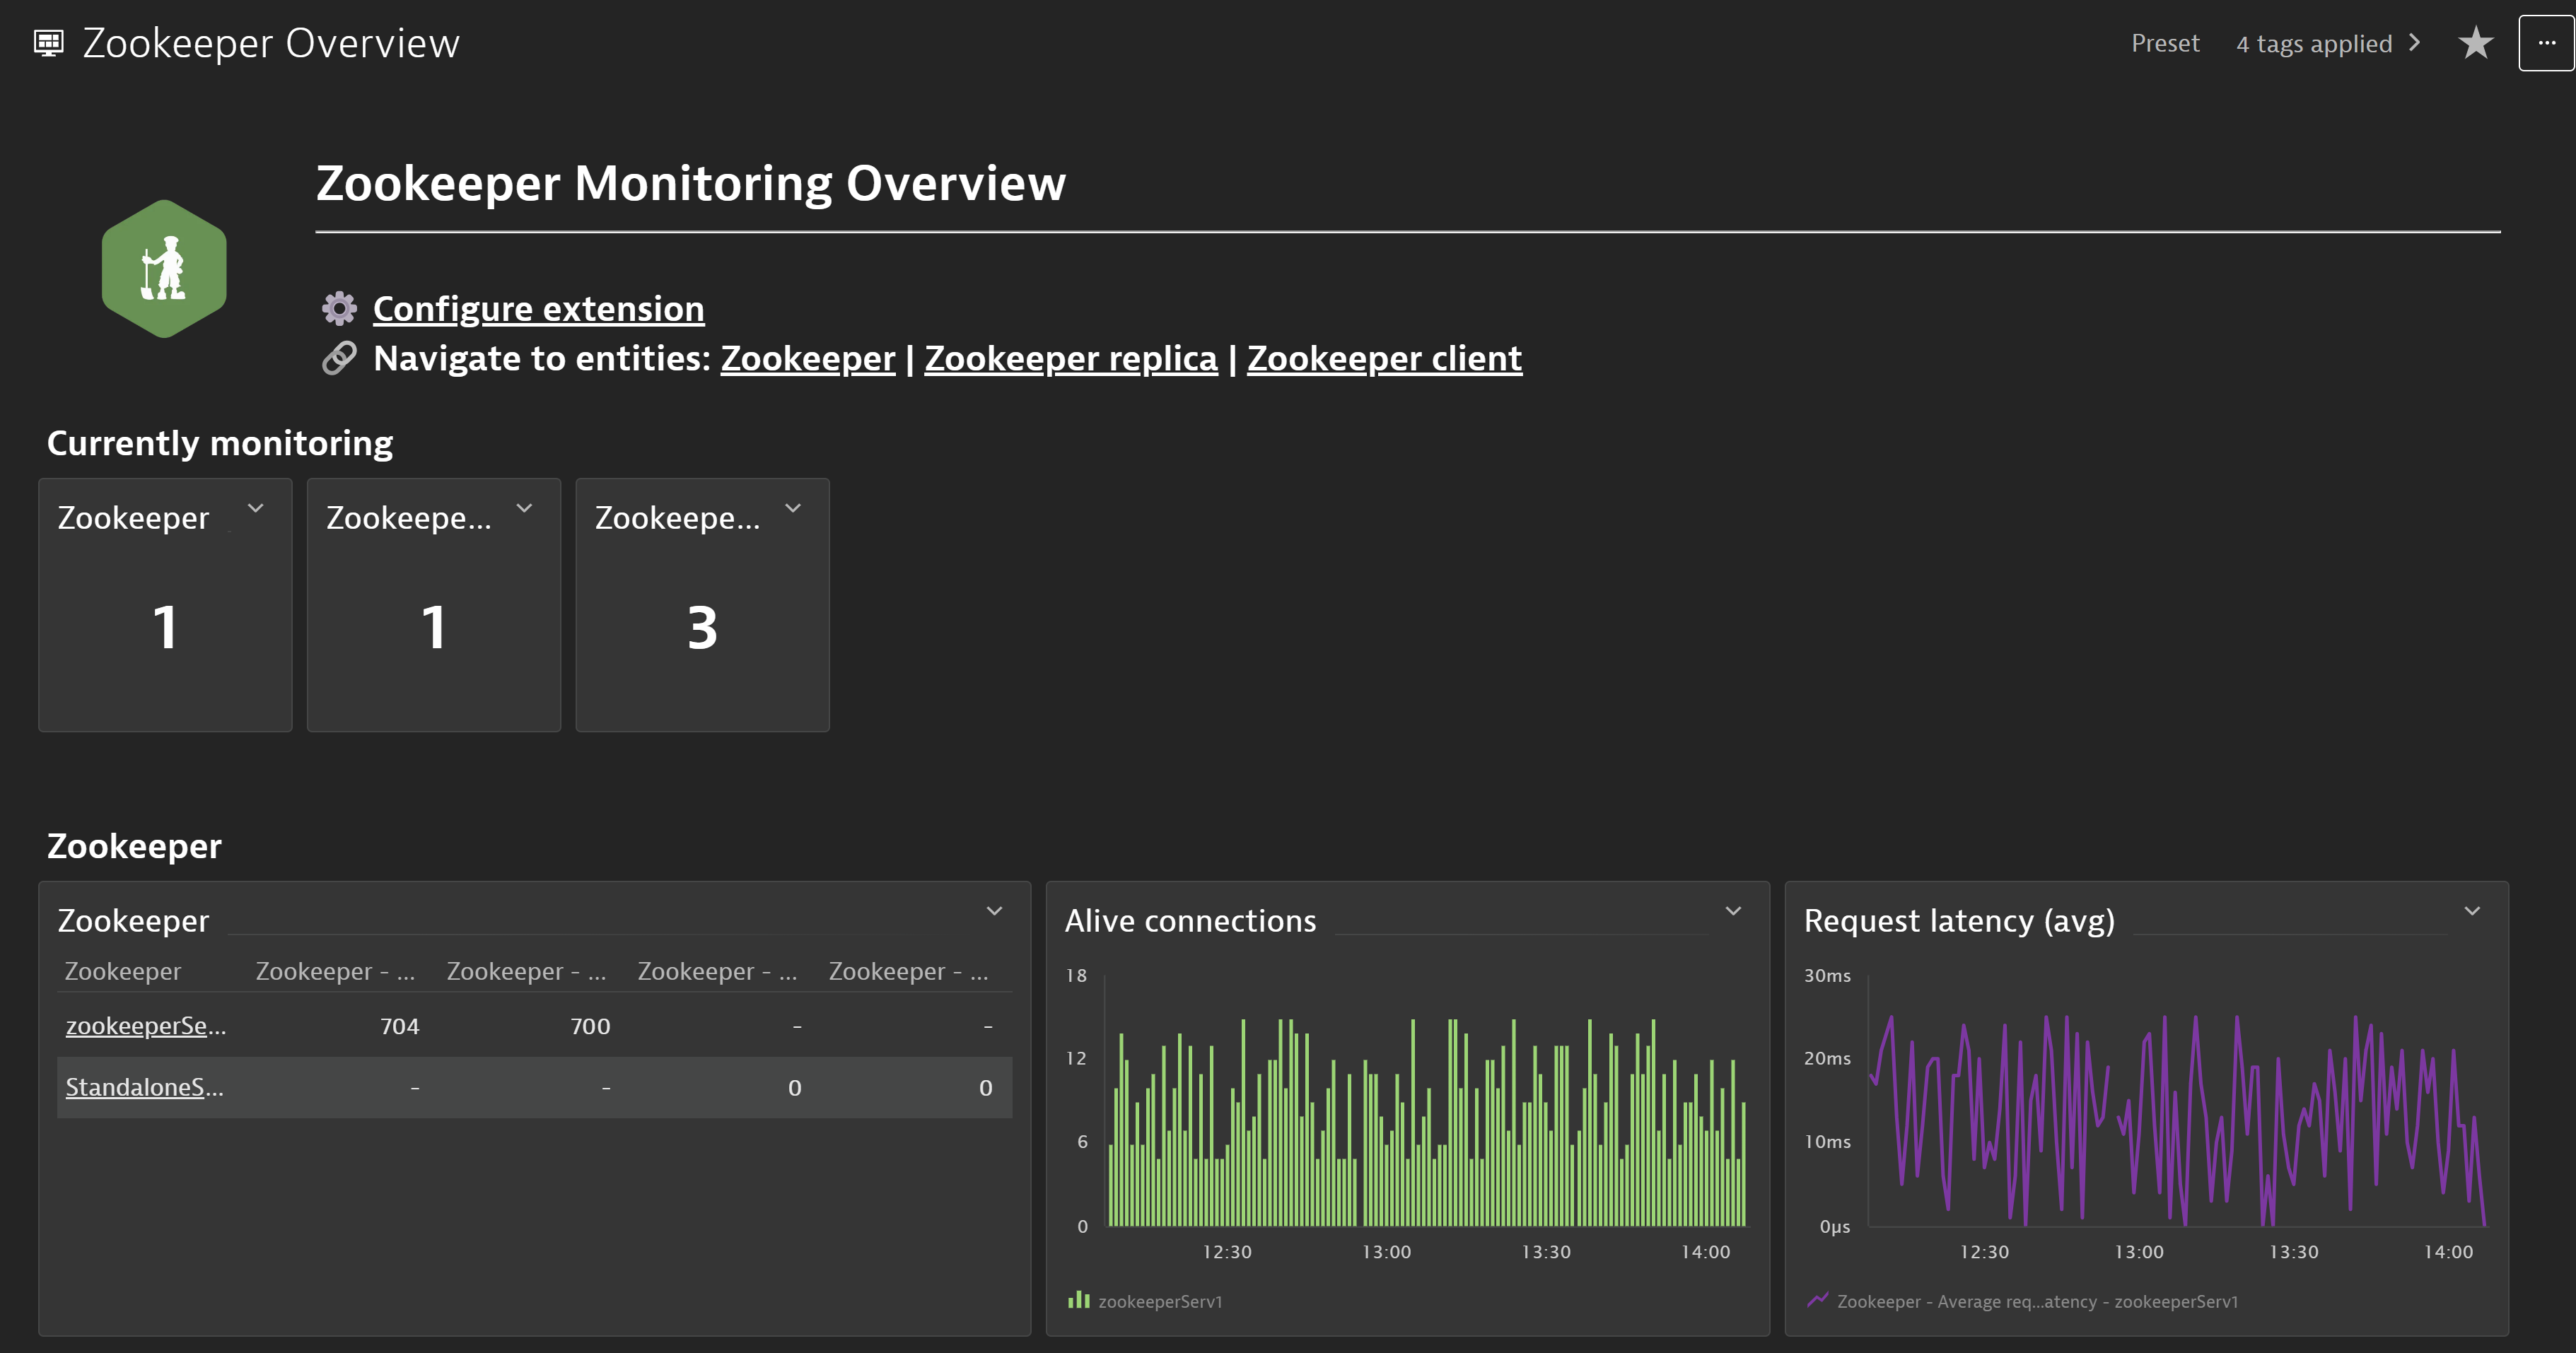 Get insights into your Zookeeper environment at a glance thanks to the included dashboard that provides access points to the different built-in views for your Zookeeper JMX data.